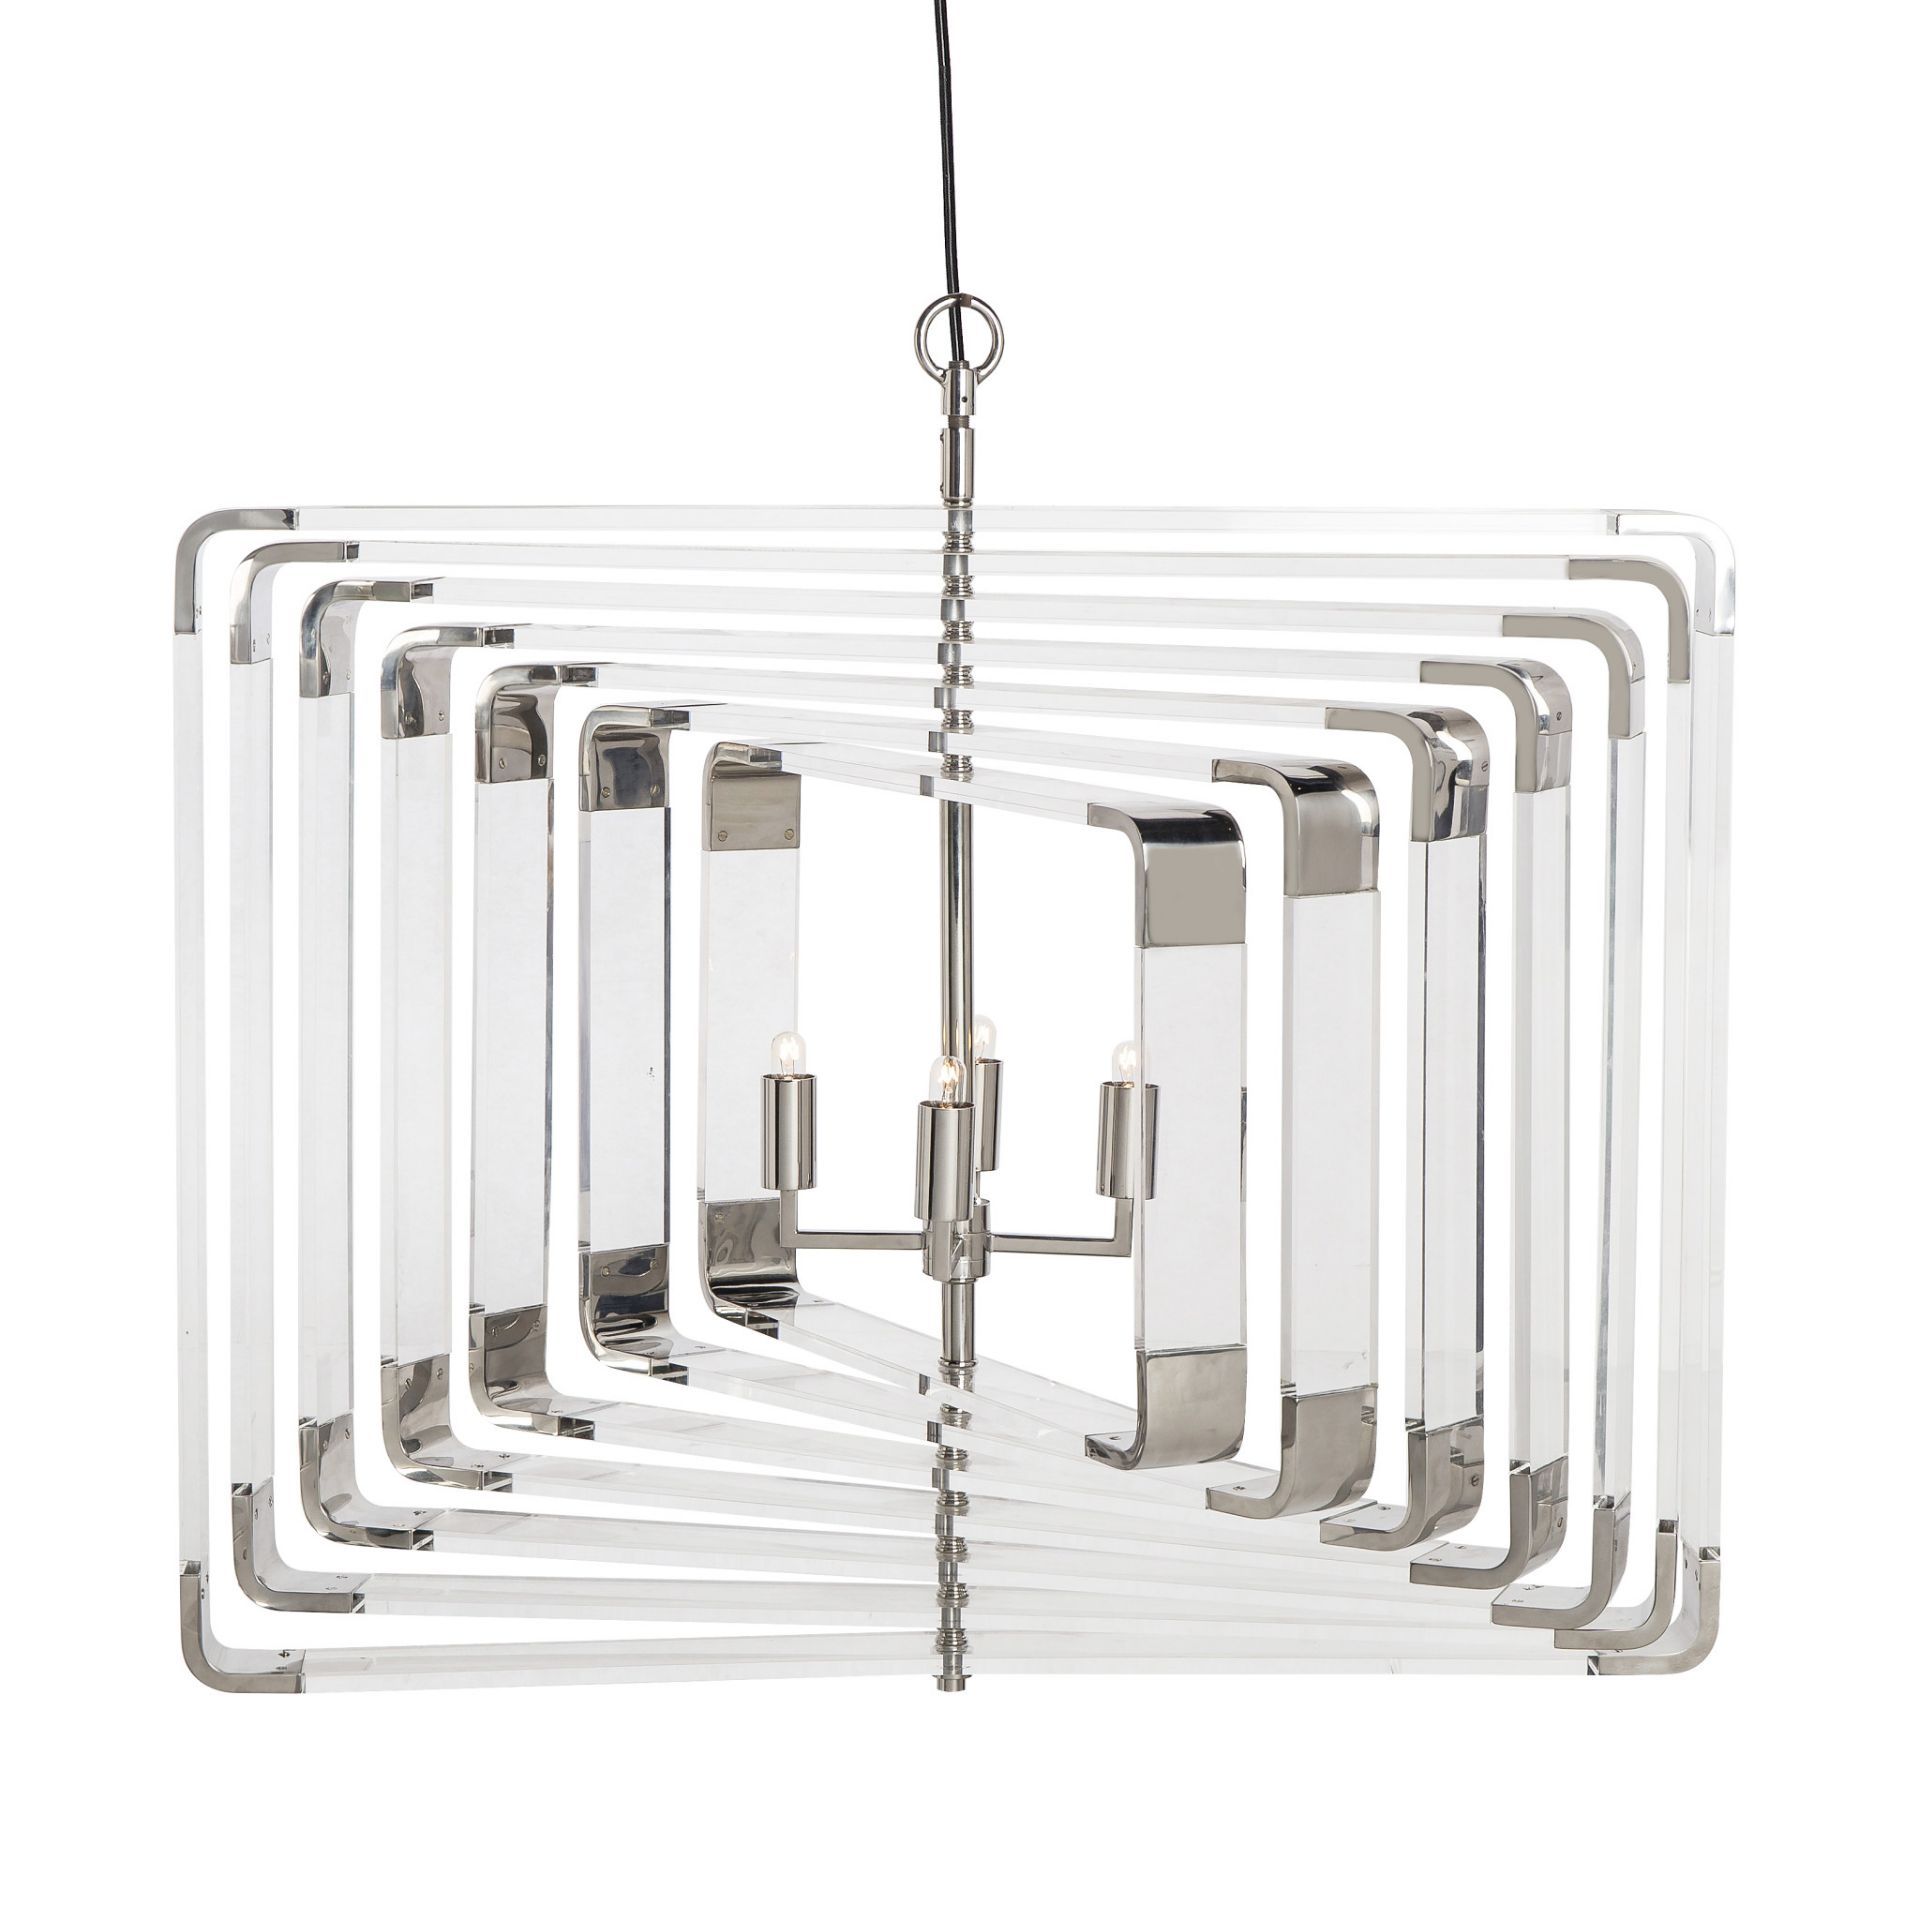 1 x Sonder Living Spiral Acrylic 7-Layer Light With Nickel Finish - New Boxed Stock - Ref: - Image 6 of 8